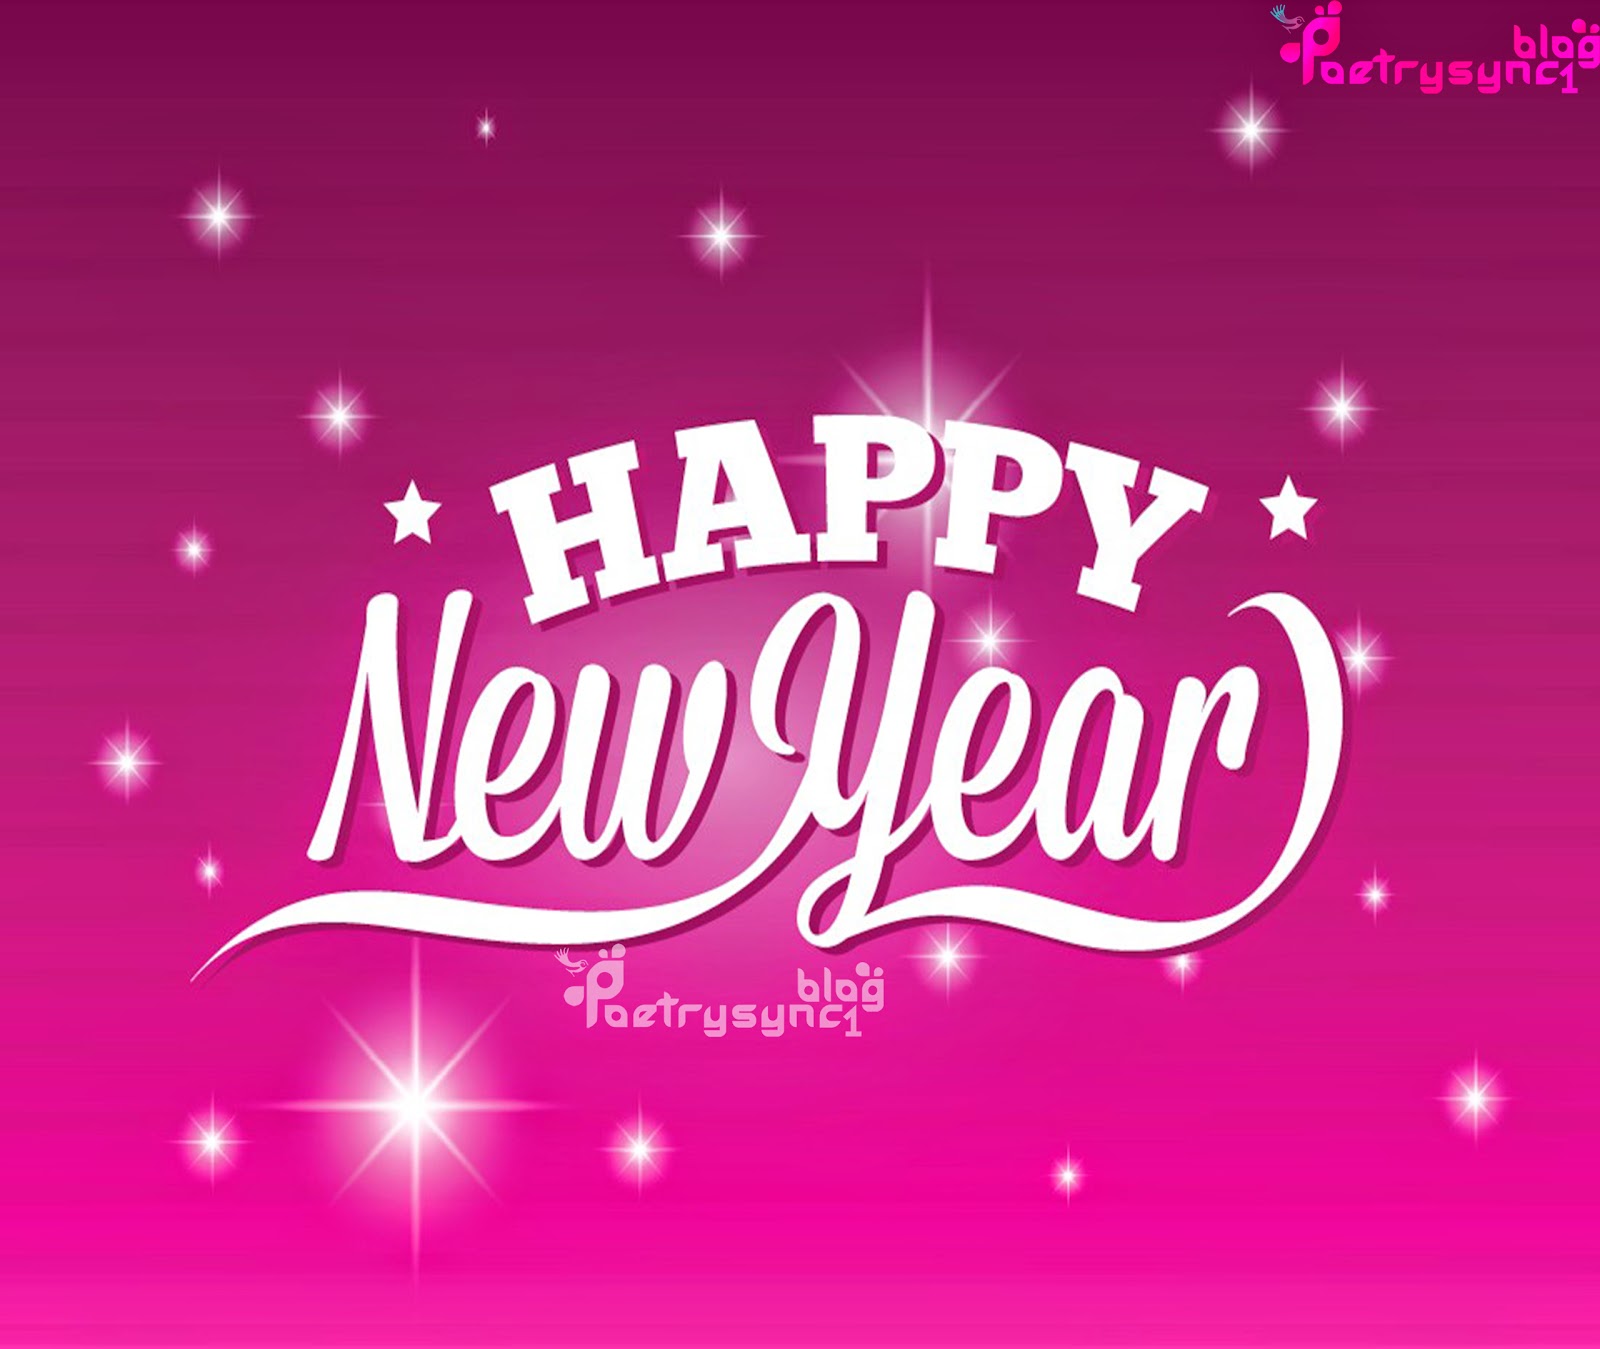 Happy New Year 2015 Wallpapers greet and wish image